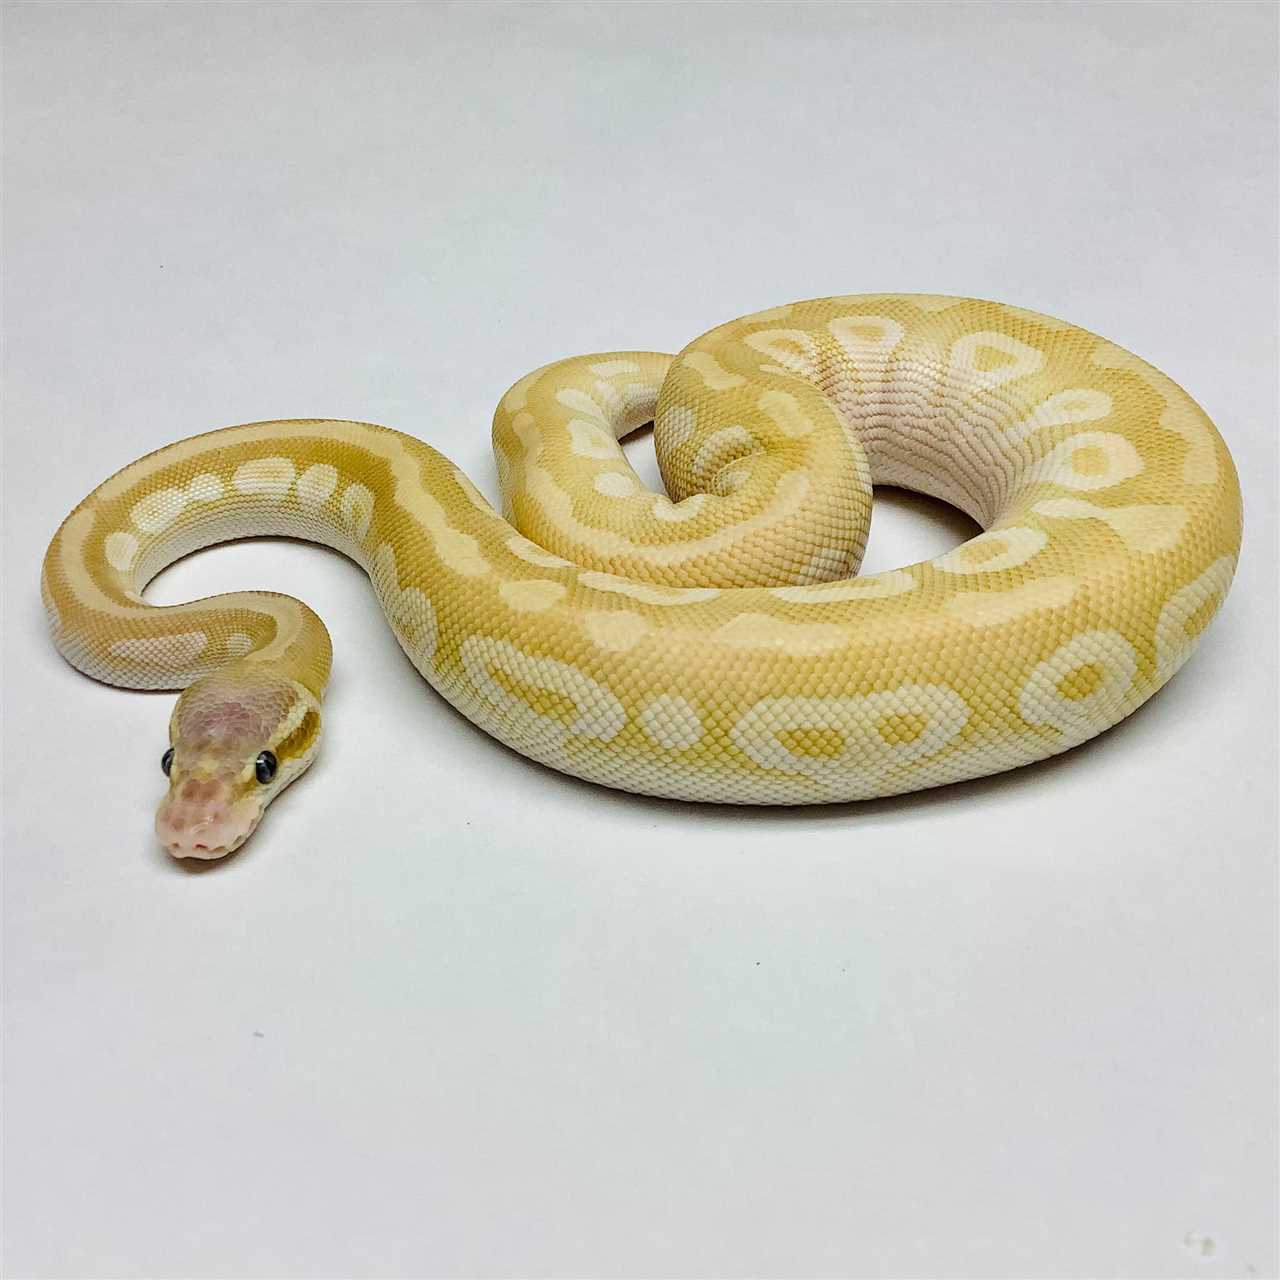 Diet and Feeding Habits of the Crystal Ball Python